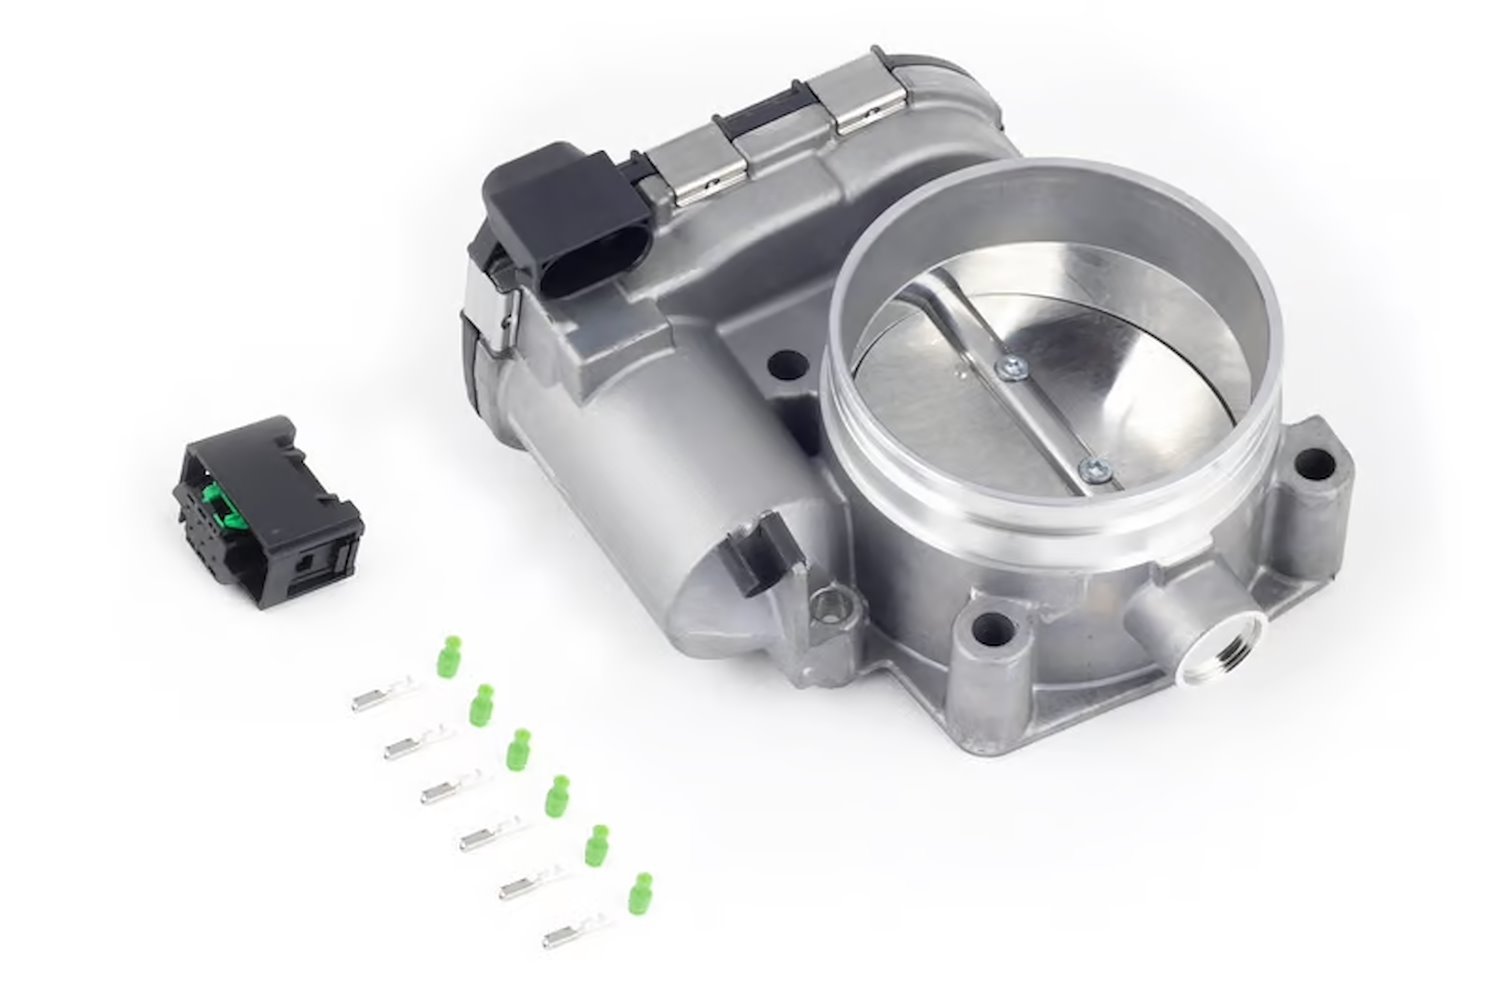 HT-011802 Bosch 74 mm Electronic Throttle Body, Includes Connector and-Pins